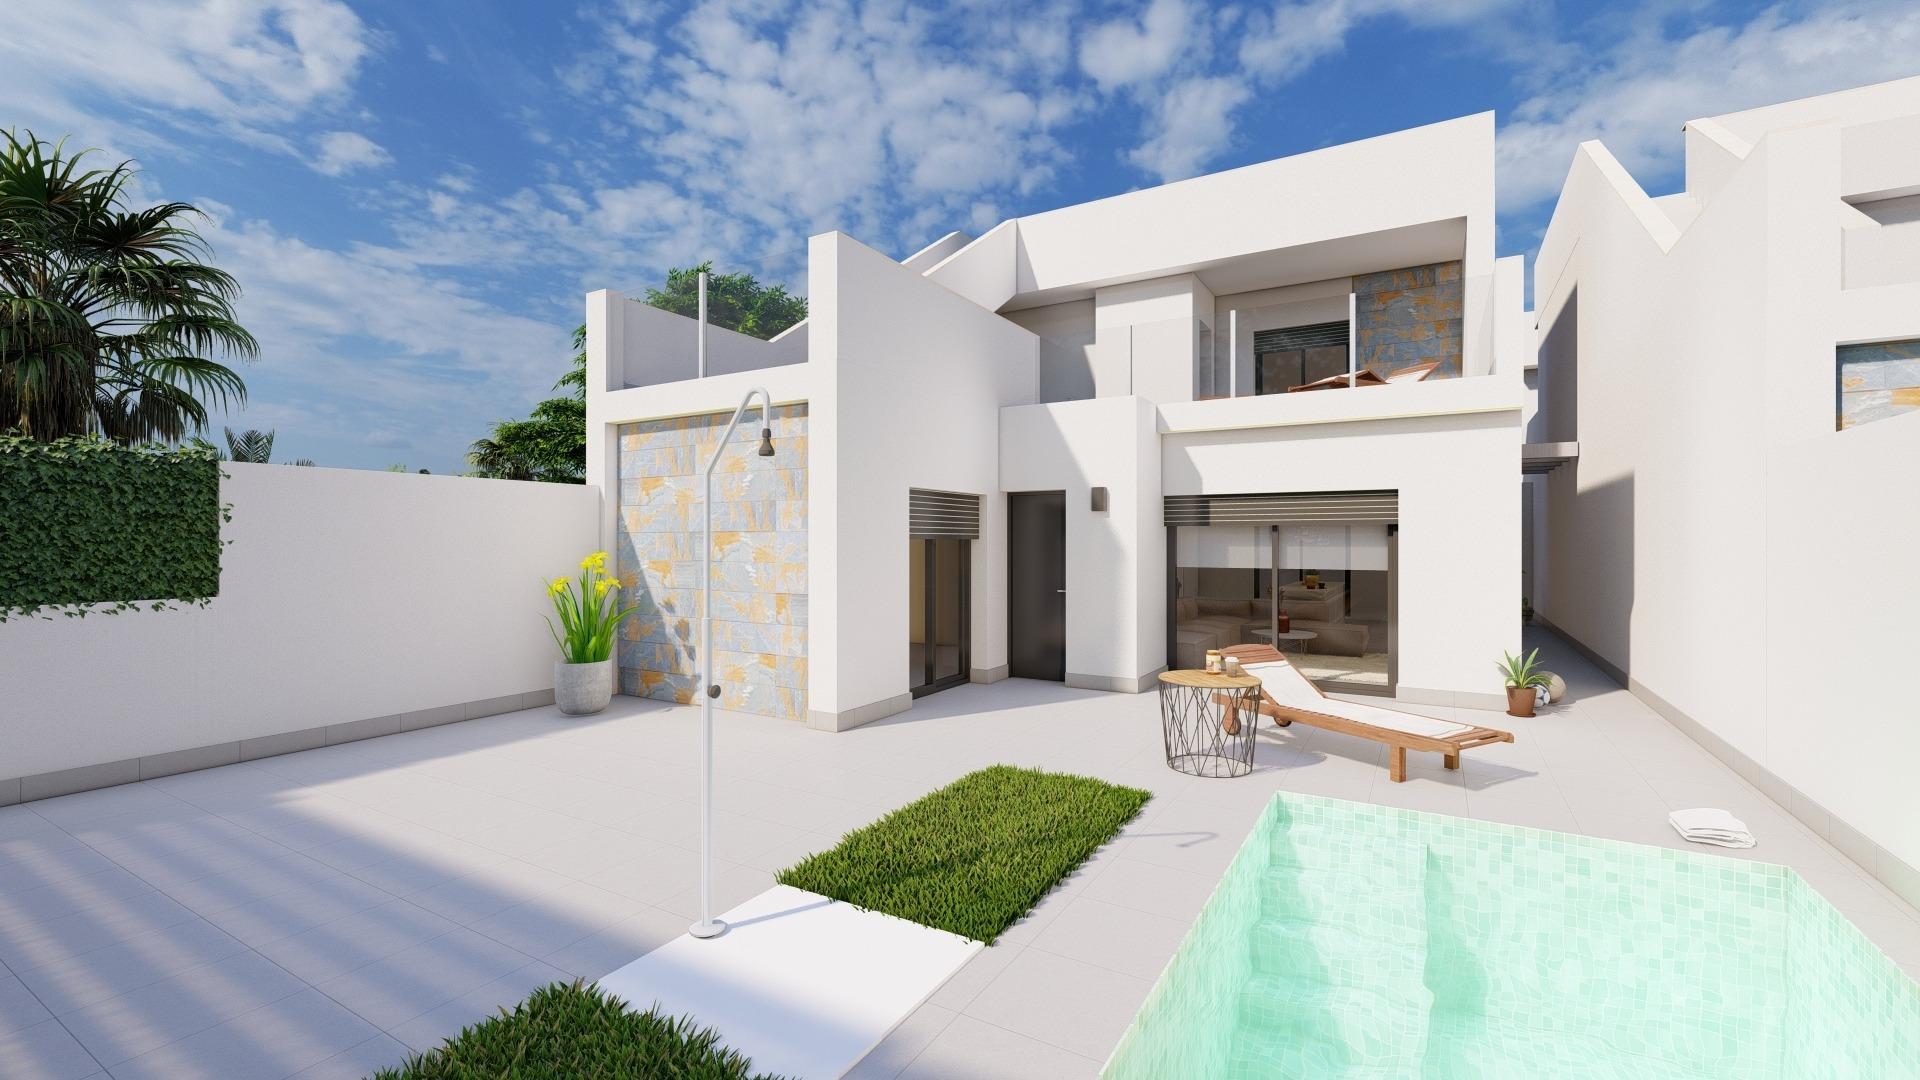 NEW BUILD TOWNHOUSES IN RODA GOLF

New Build residential of townhouses in Roda golf resort.

Residential consisting of 5 beautiful townhouses, each one with 3 bedrooms and 3 bathrooms and its own private pool. 

All townhouses have terraces on the ground floor and a spacious solarium on the first floor, allowing for year-round sun enjoyment.


Perfect location overlooking the golf course, 20 minutes from Murcia airport and 10 minutes from the Mar Menor and the Mediterranean beaches.

Roda is the ideal golf course to practice your favourite sport and enjoy your holidays in the Mar Menor, Murcia. Considered one of the best golf courses in Murcia, Roda Golf is located in a paradisiacal setting where the beautiful nature vibrates harmoniously with the shores of the Mediterranean Sea.

An unforgettable experience for you and your family, our golf course offers activities and facilities for any child or adult, regardless of their level of golf. The climate is temperate, the sun shines almost 300 days a year and the average temperature is around 21 oC.